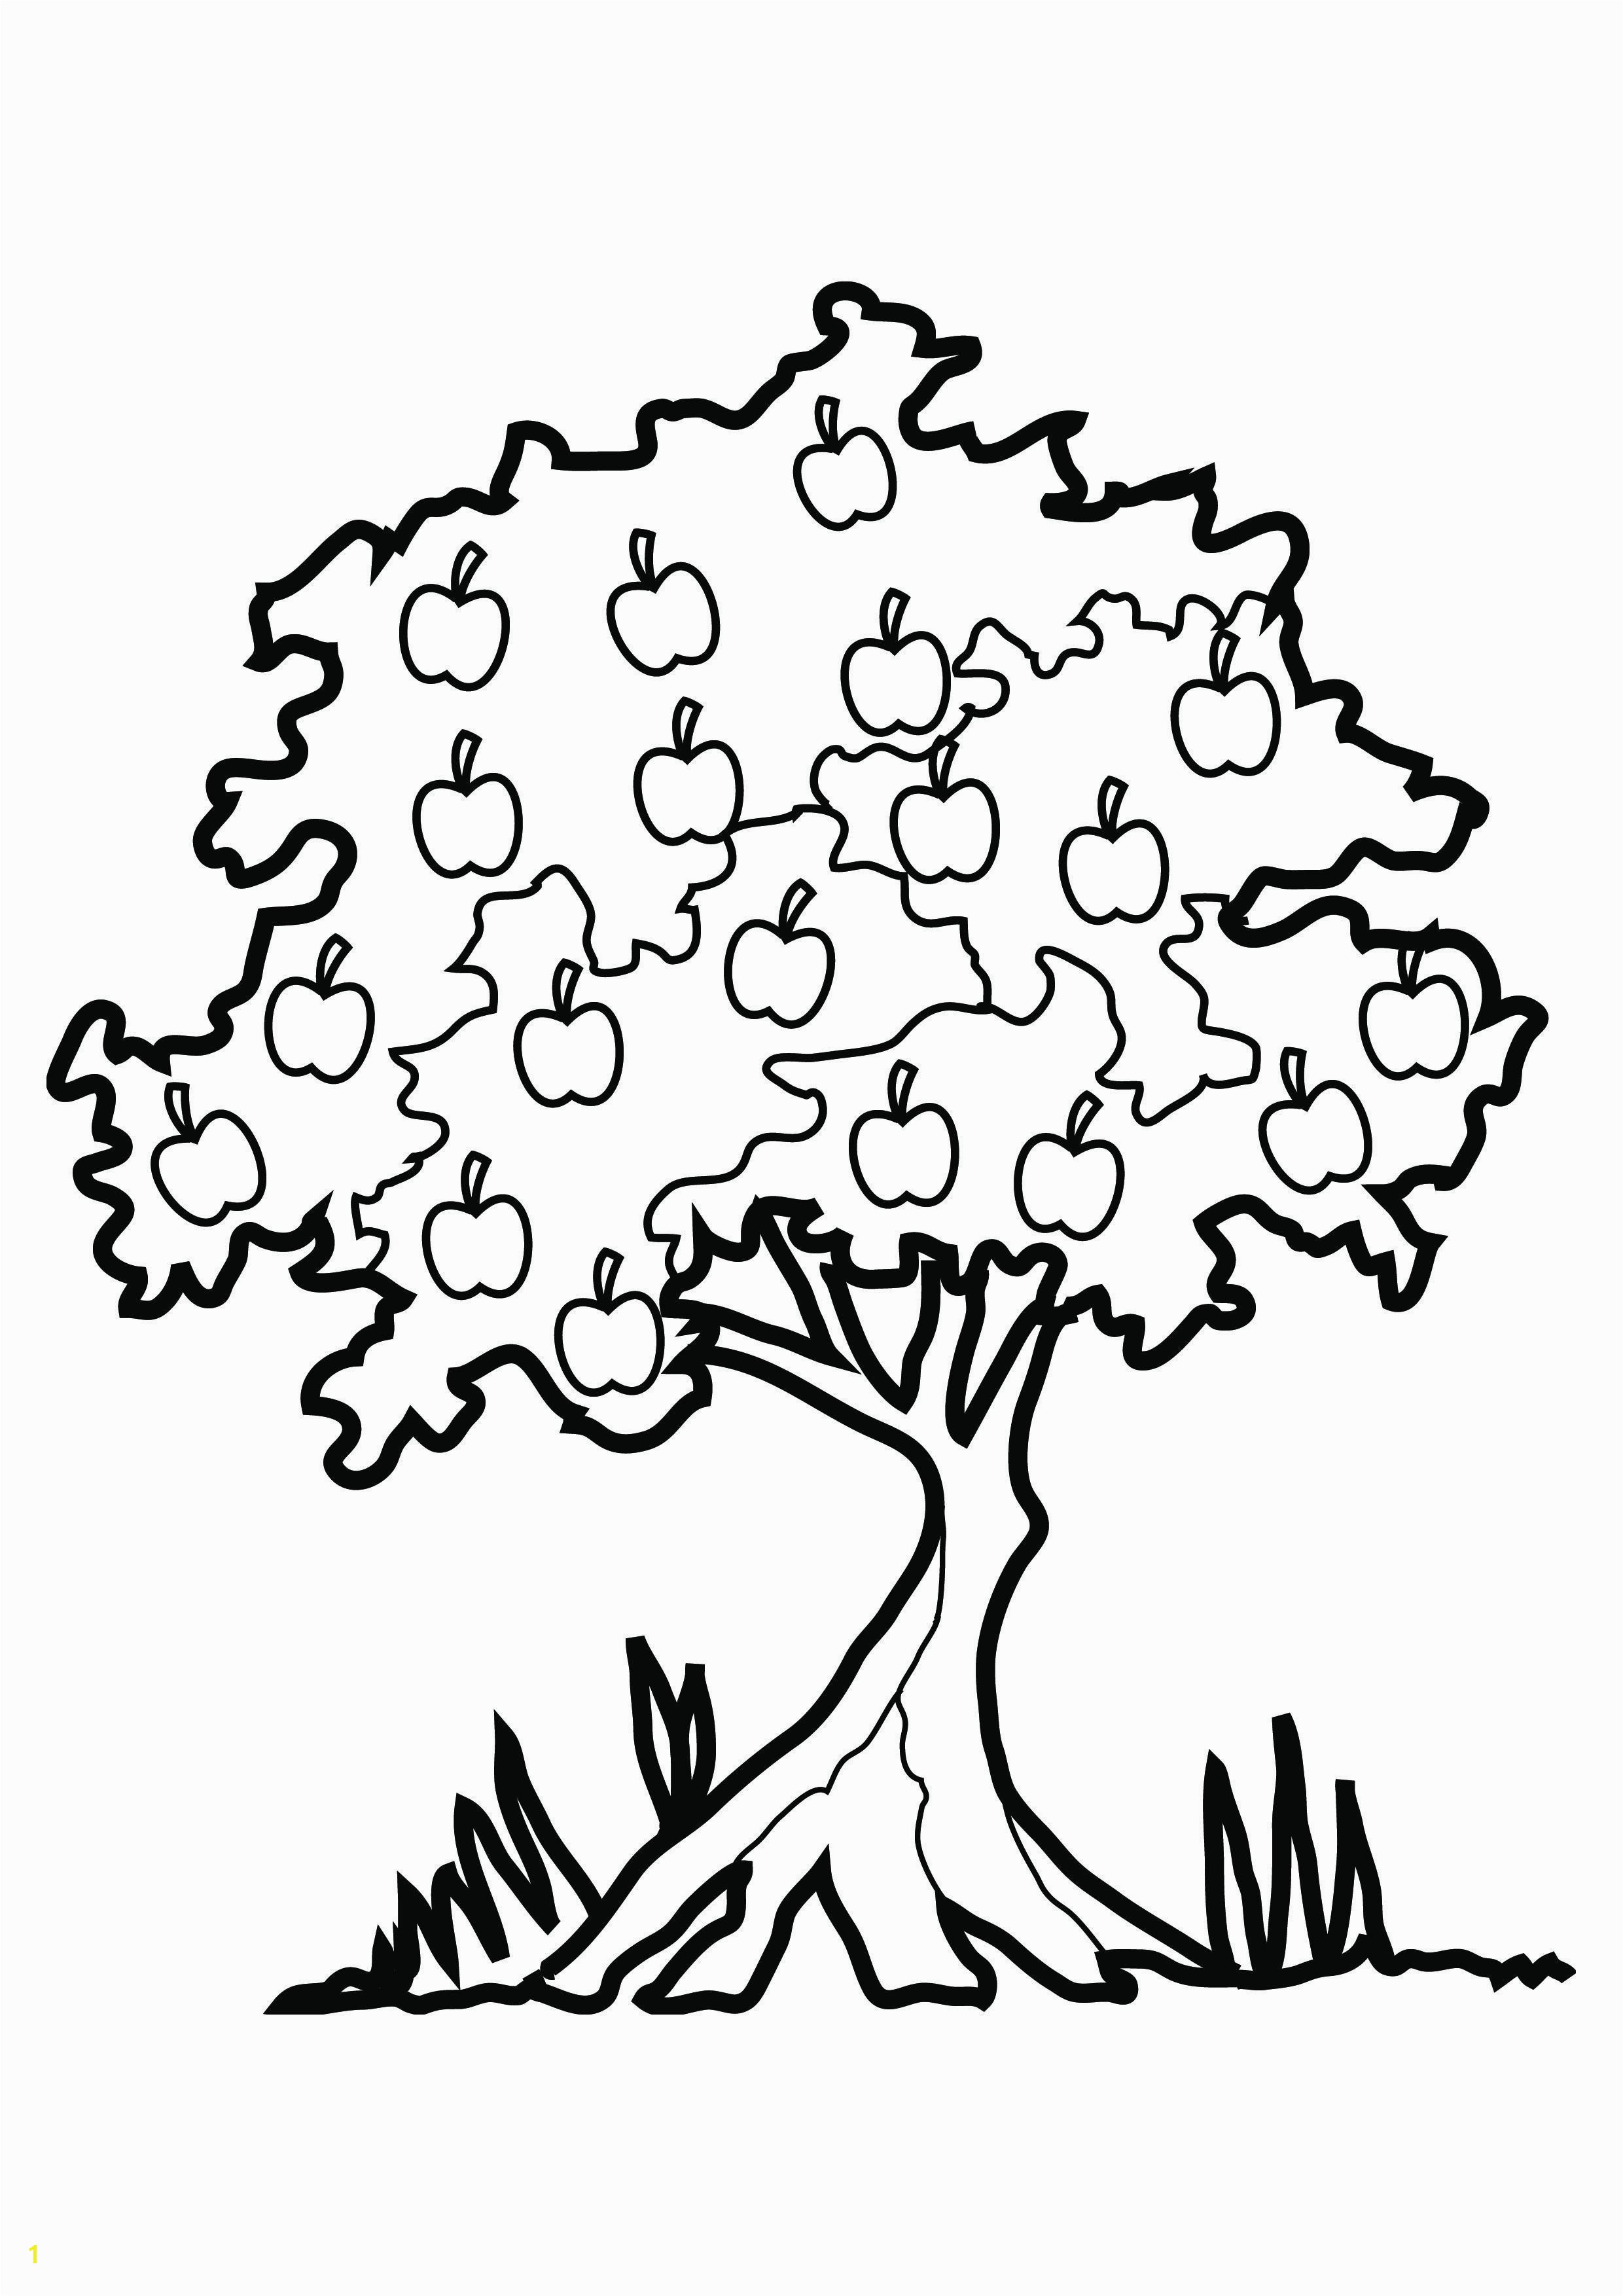 Tree Bark Coloring Pages Unique Pecan Tree Drawing at Getdrawings